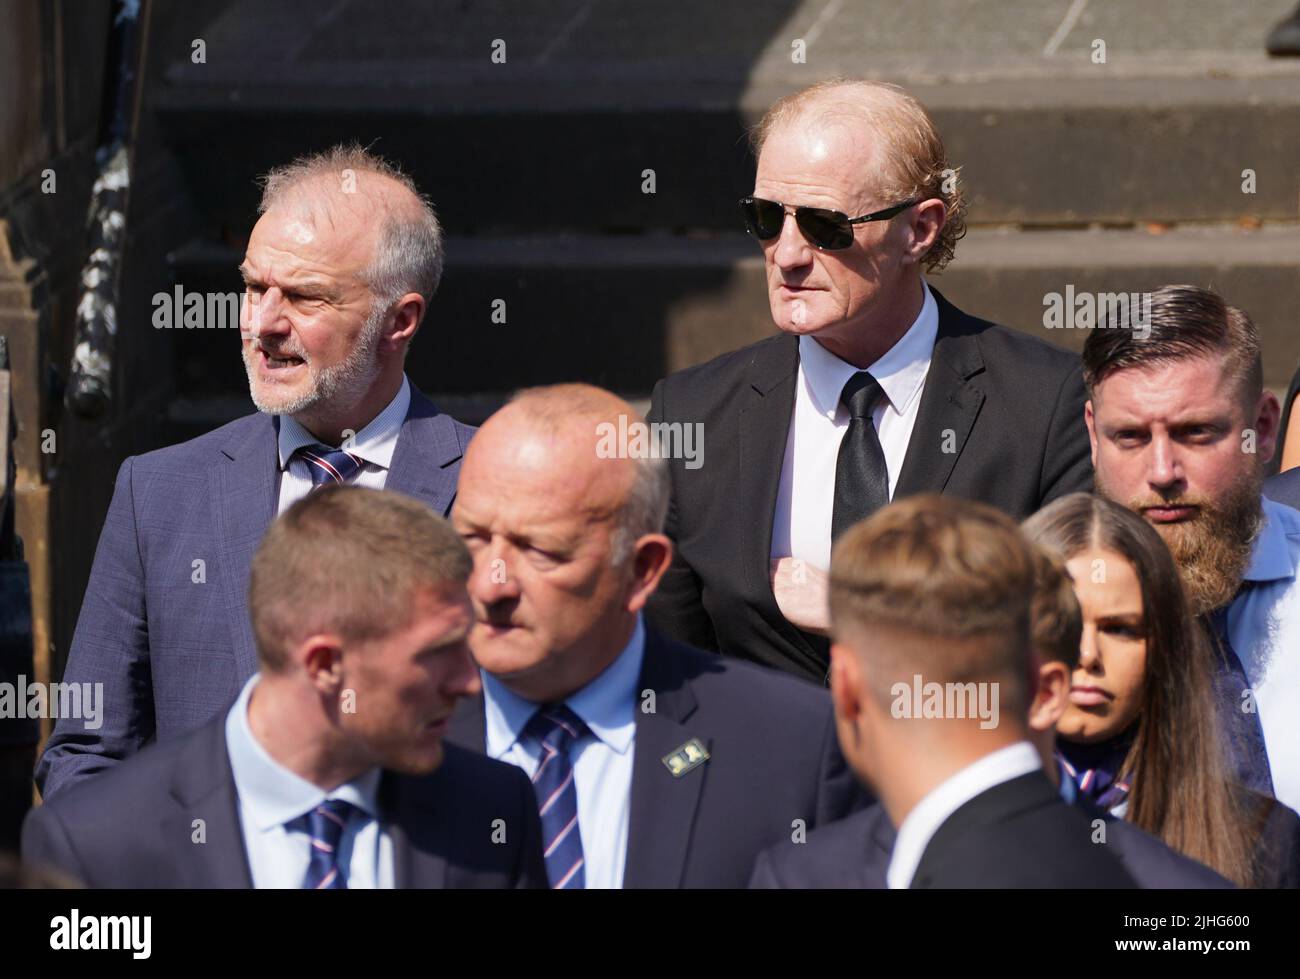 Former Rangers players Fraser Wishart (left) and Colin Hendry leave the church after of the funeral service of former Rangers goalkeeper Andy Goram, held at the Wellington Church, Glasgow. Goram who made 260 appearances for Rangers between 1991 and 1998, where he was simply known as 'The Goalie', died at the age of 58 on Saturday July 2, 2022. Picture date: Monday July 18, 2022. Stock Photo